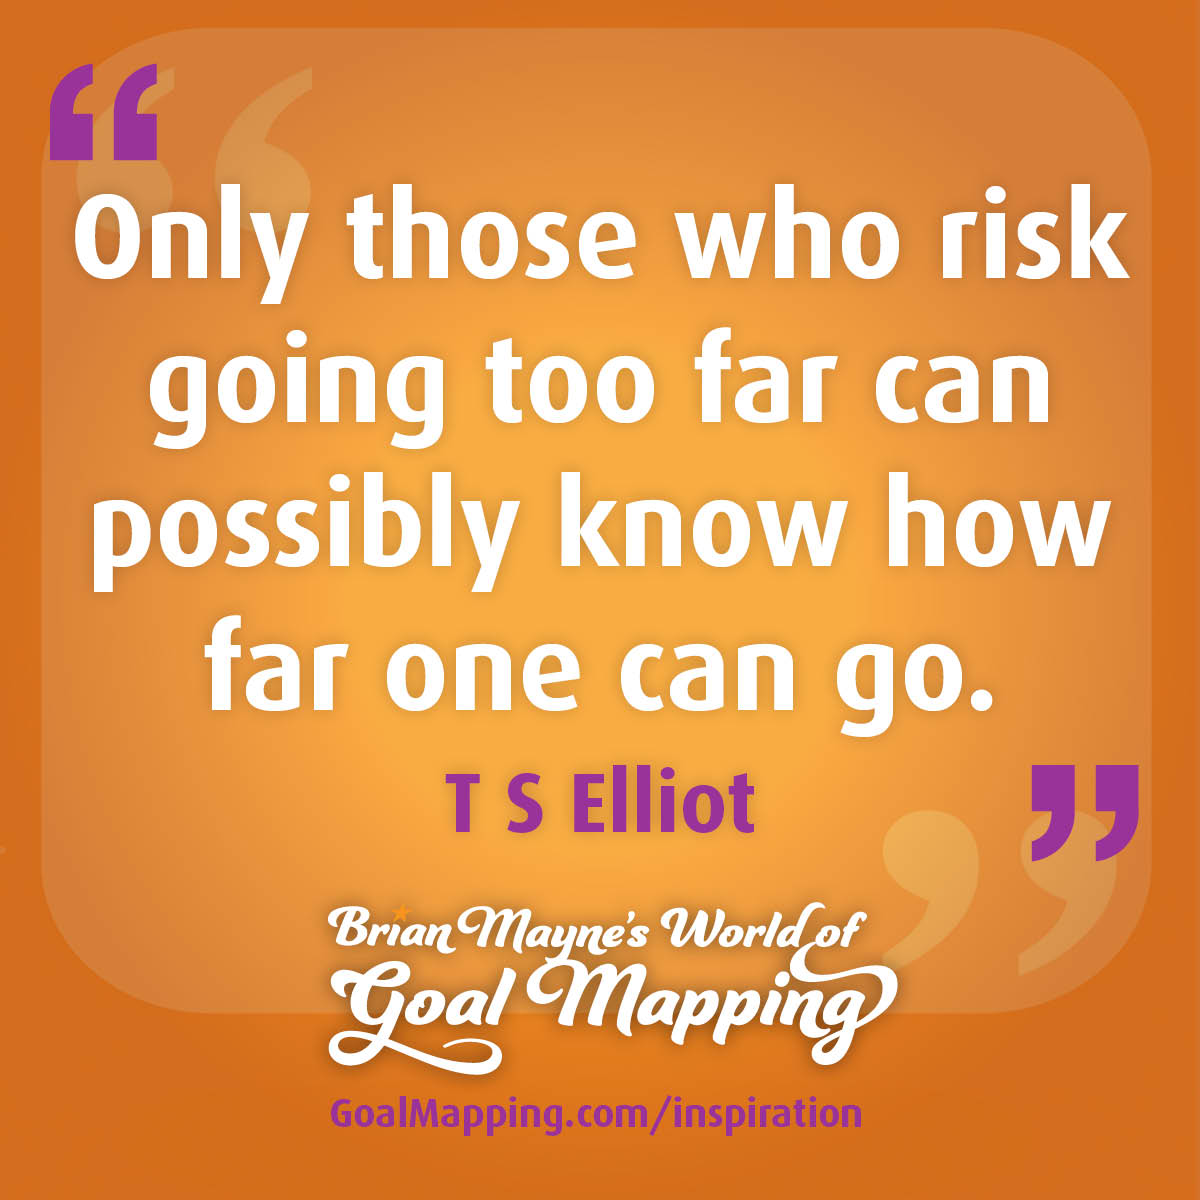 "Only those who risk going too far can possibly know how far one can go." T S Elliot